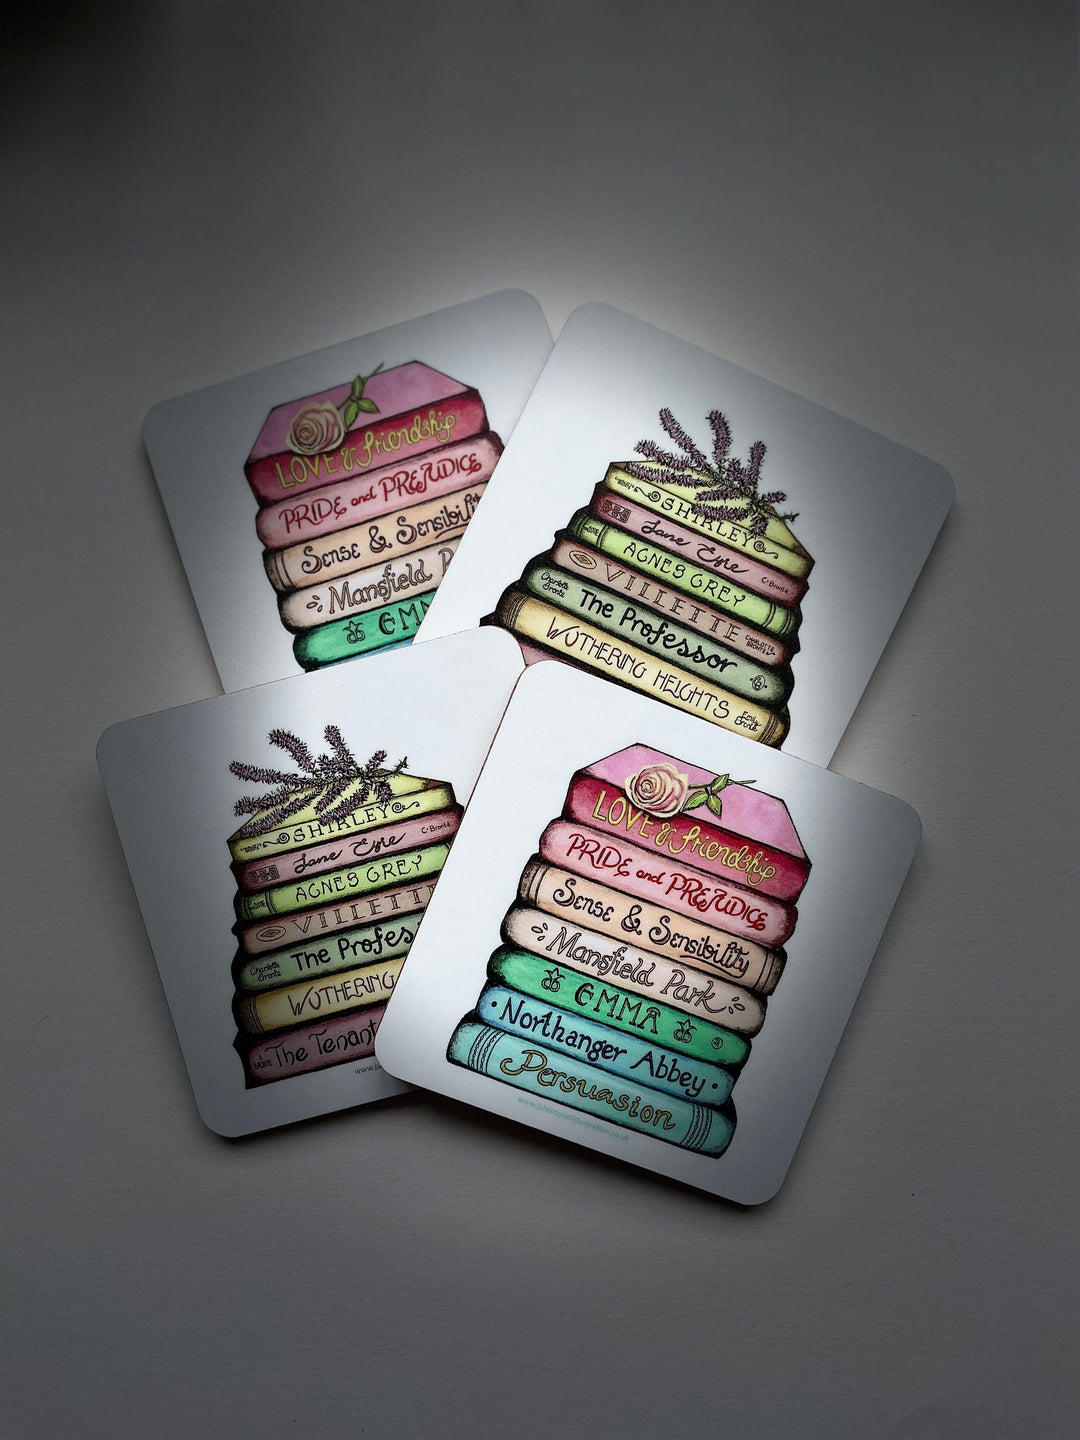 Set of 4 Jane Austen and Bronte Sisters Book Stack Coasters, Made in the UK using FSC sustainable wood